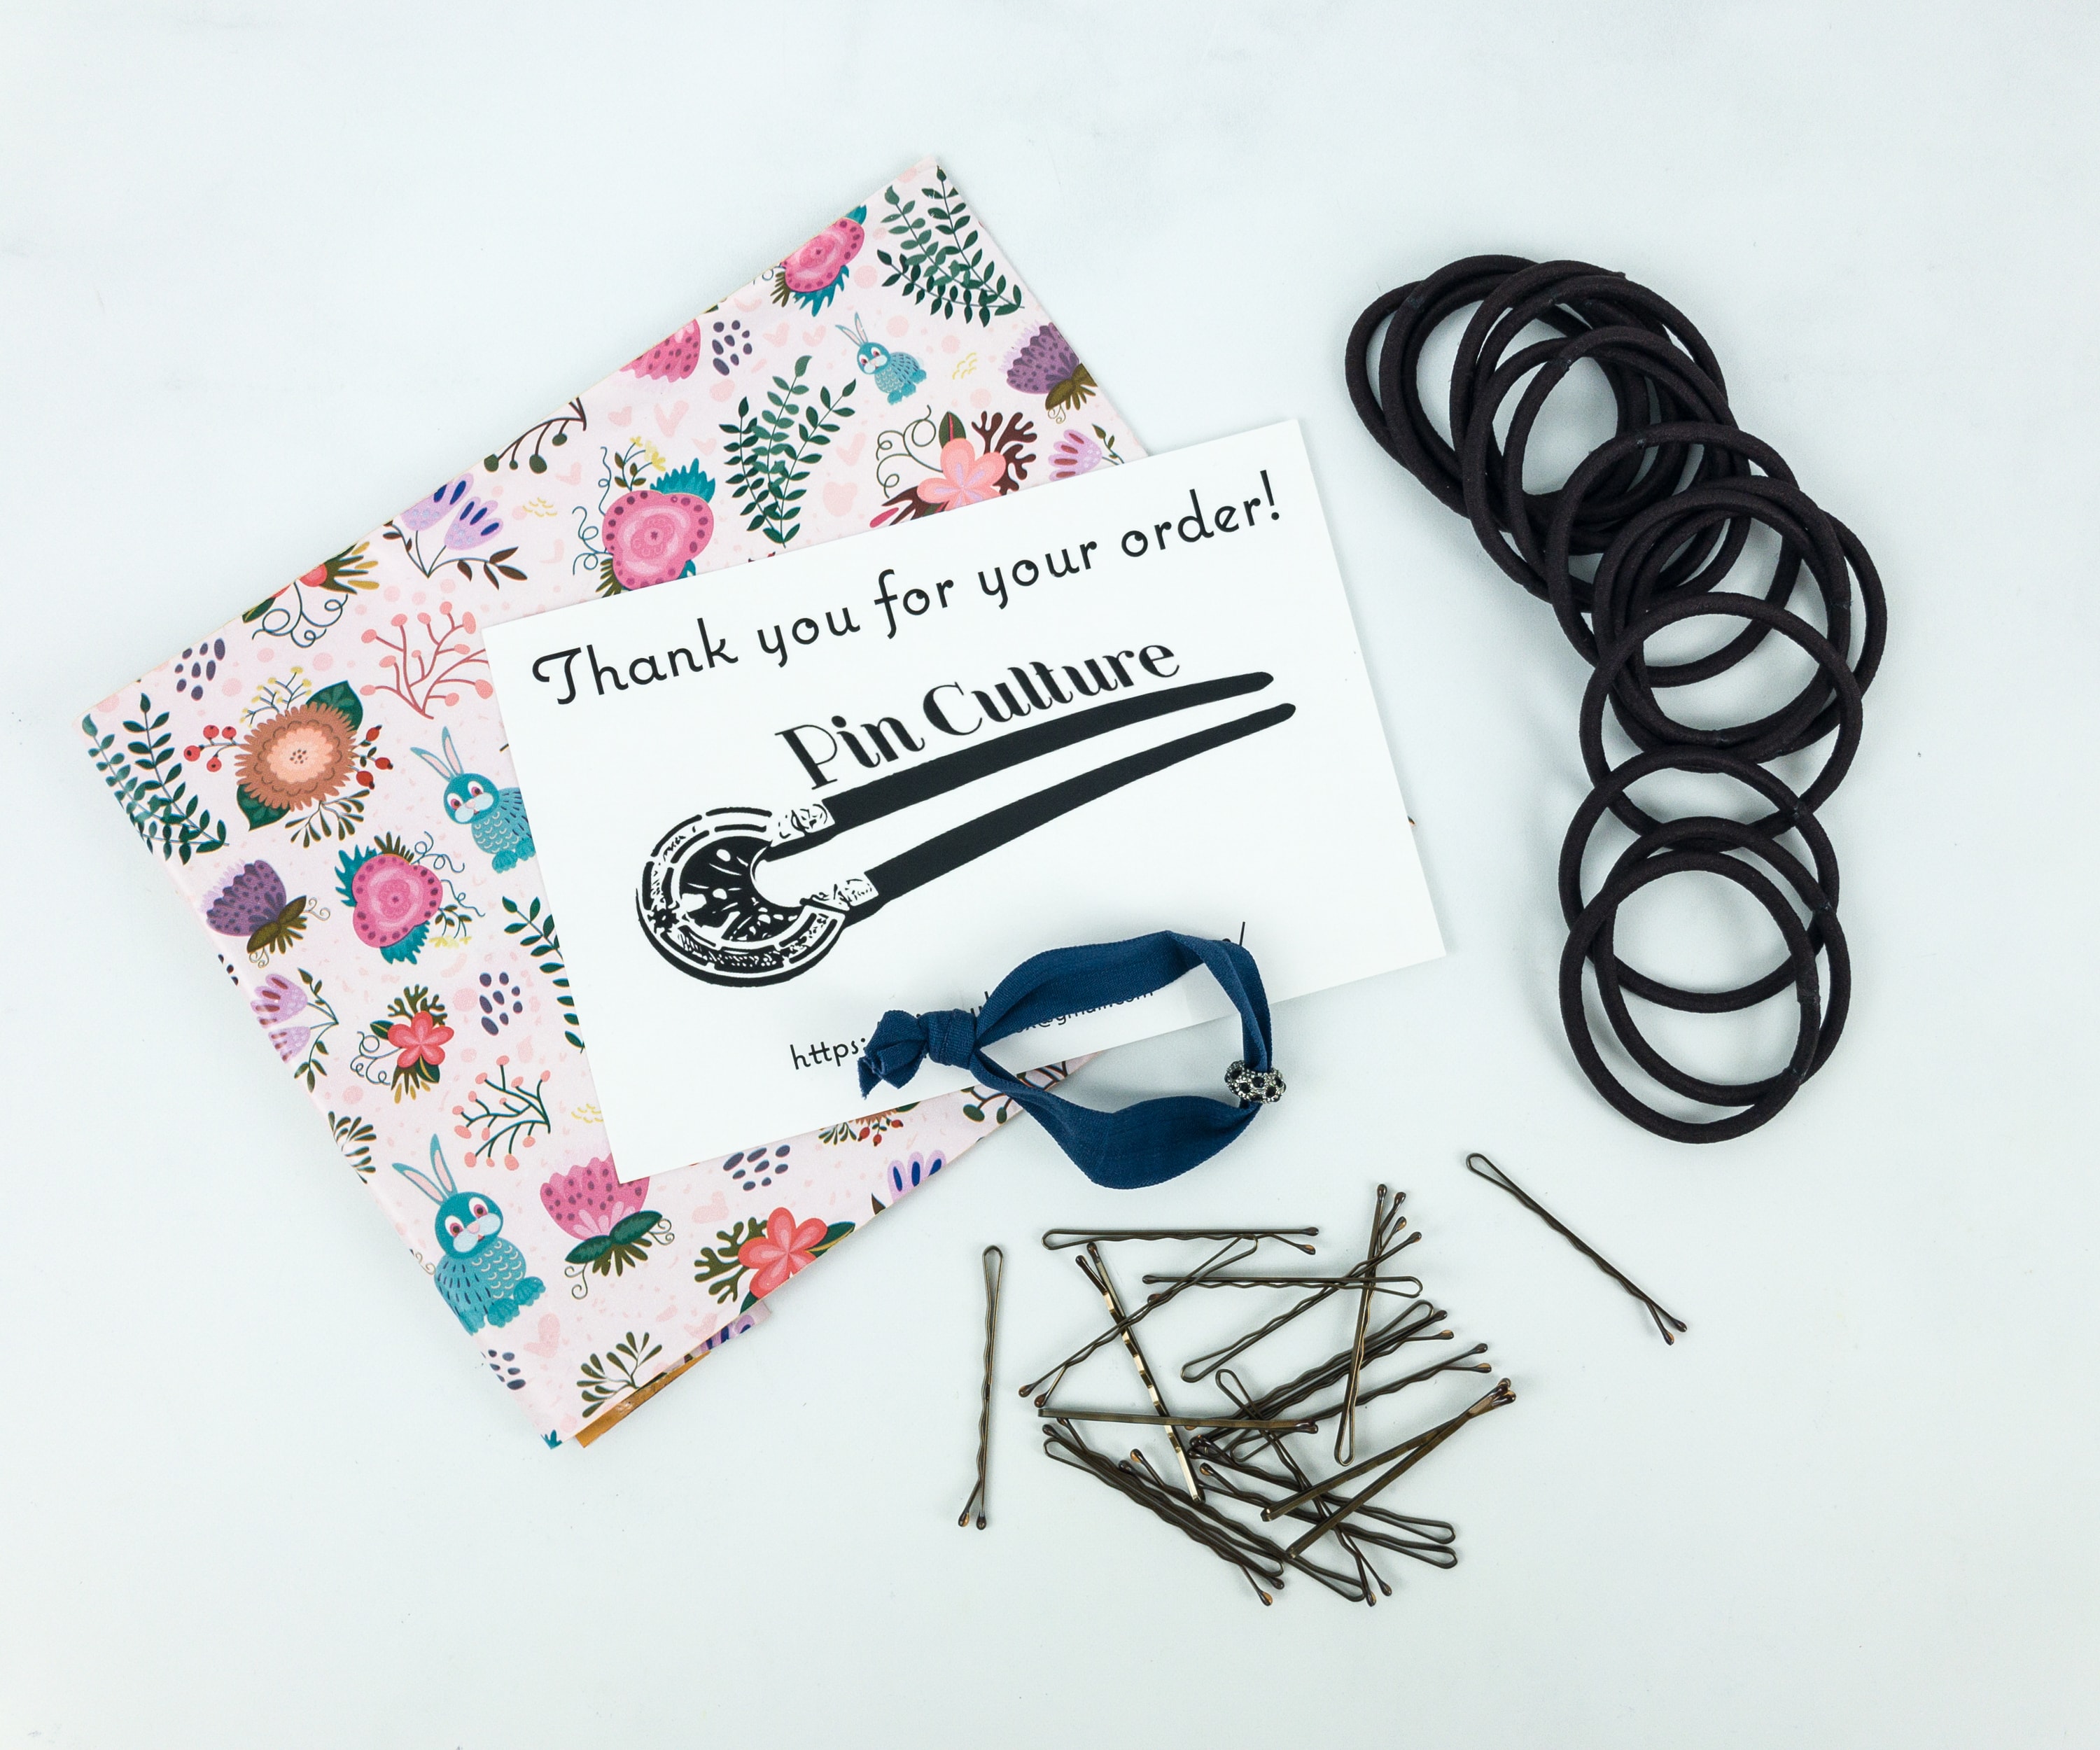 Pin Culture Subscription Box Review + Coupon - Bobby Pins and Hair Ties -  Hello Subscription